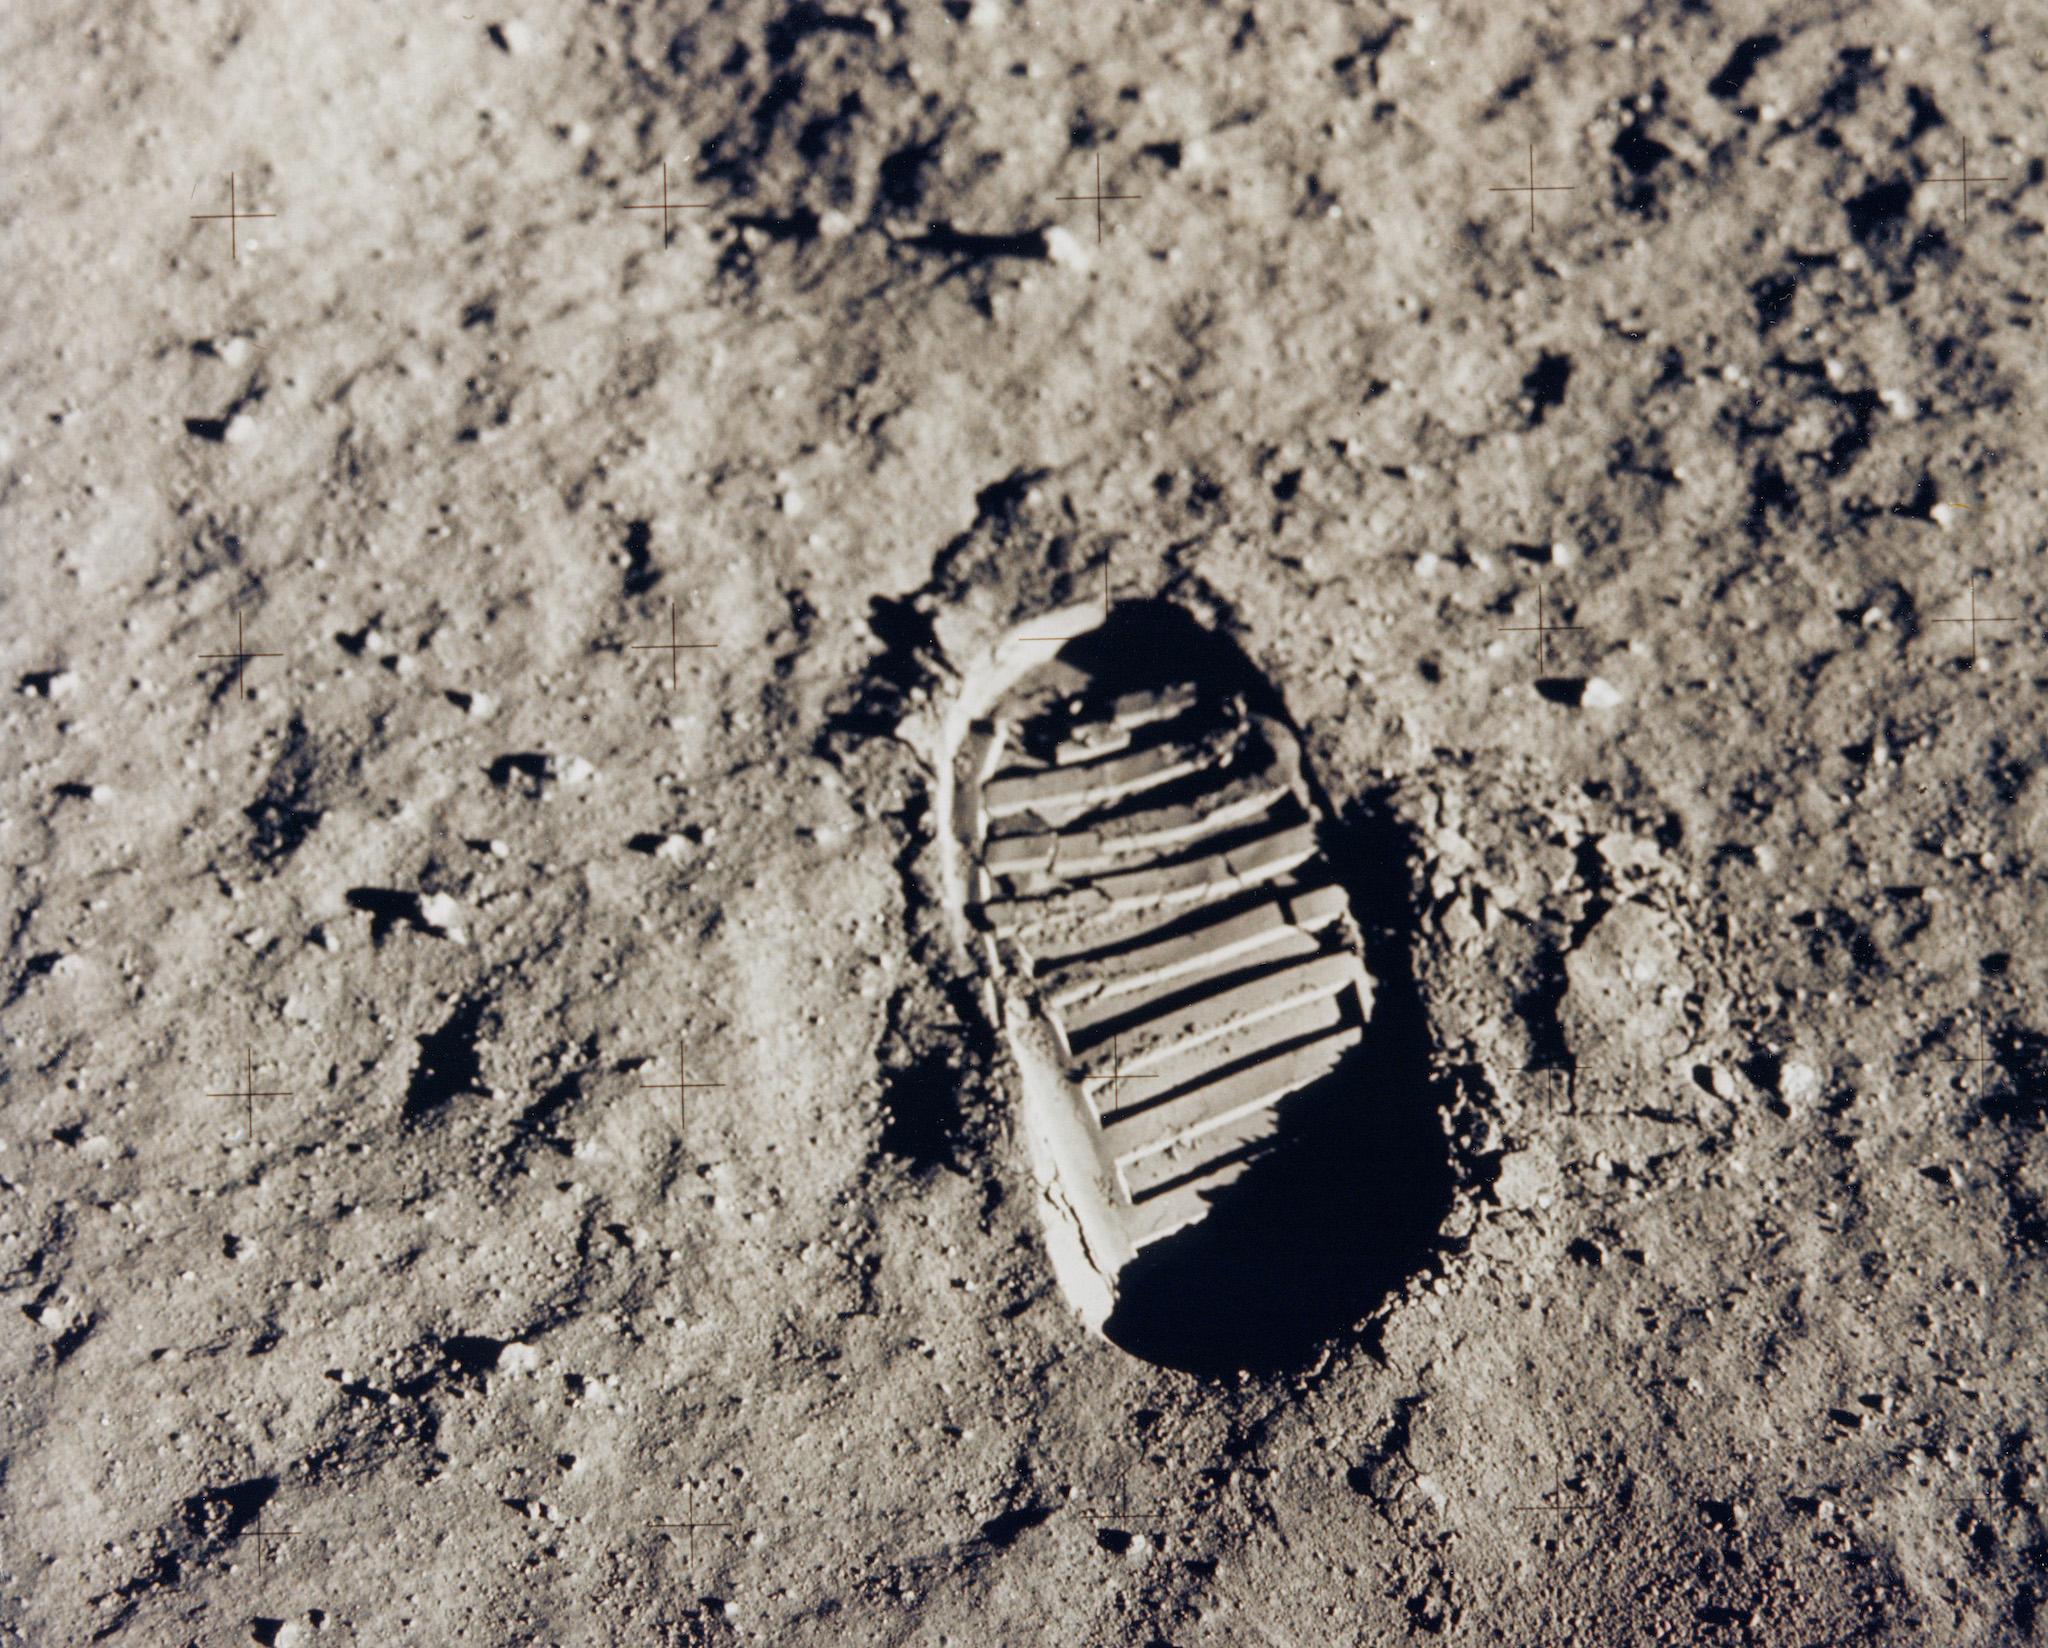 This NASA file image, dated July 20, 1969, shows one of the first footprints of Apollo 11 astronaut Edwin "Buzz" Aldrin on the moon